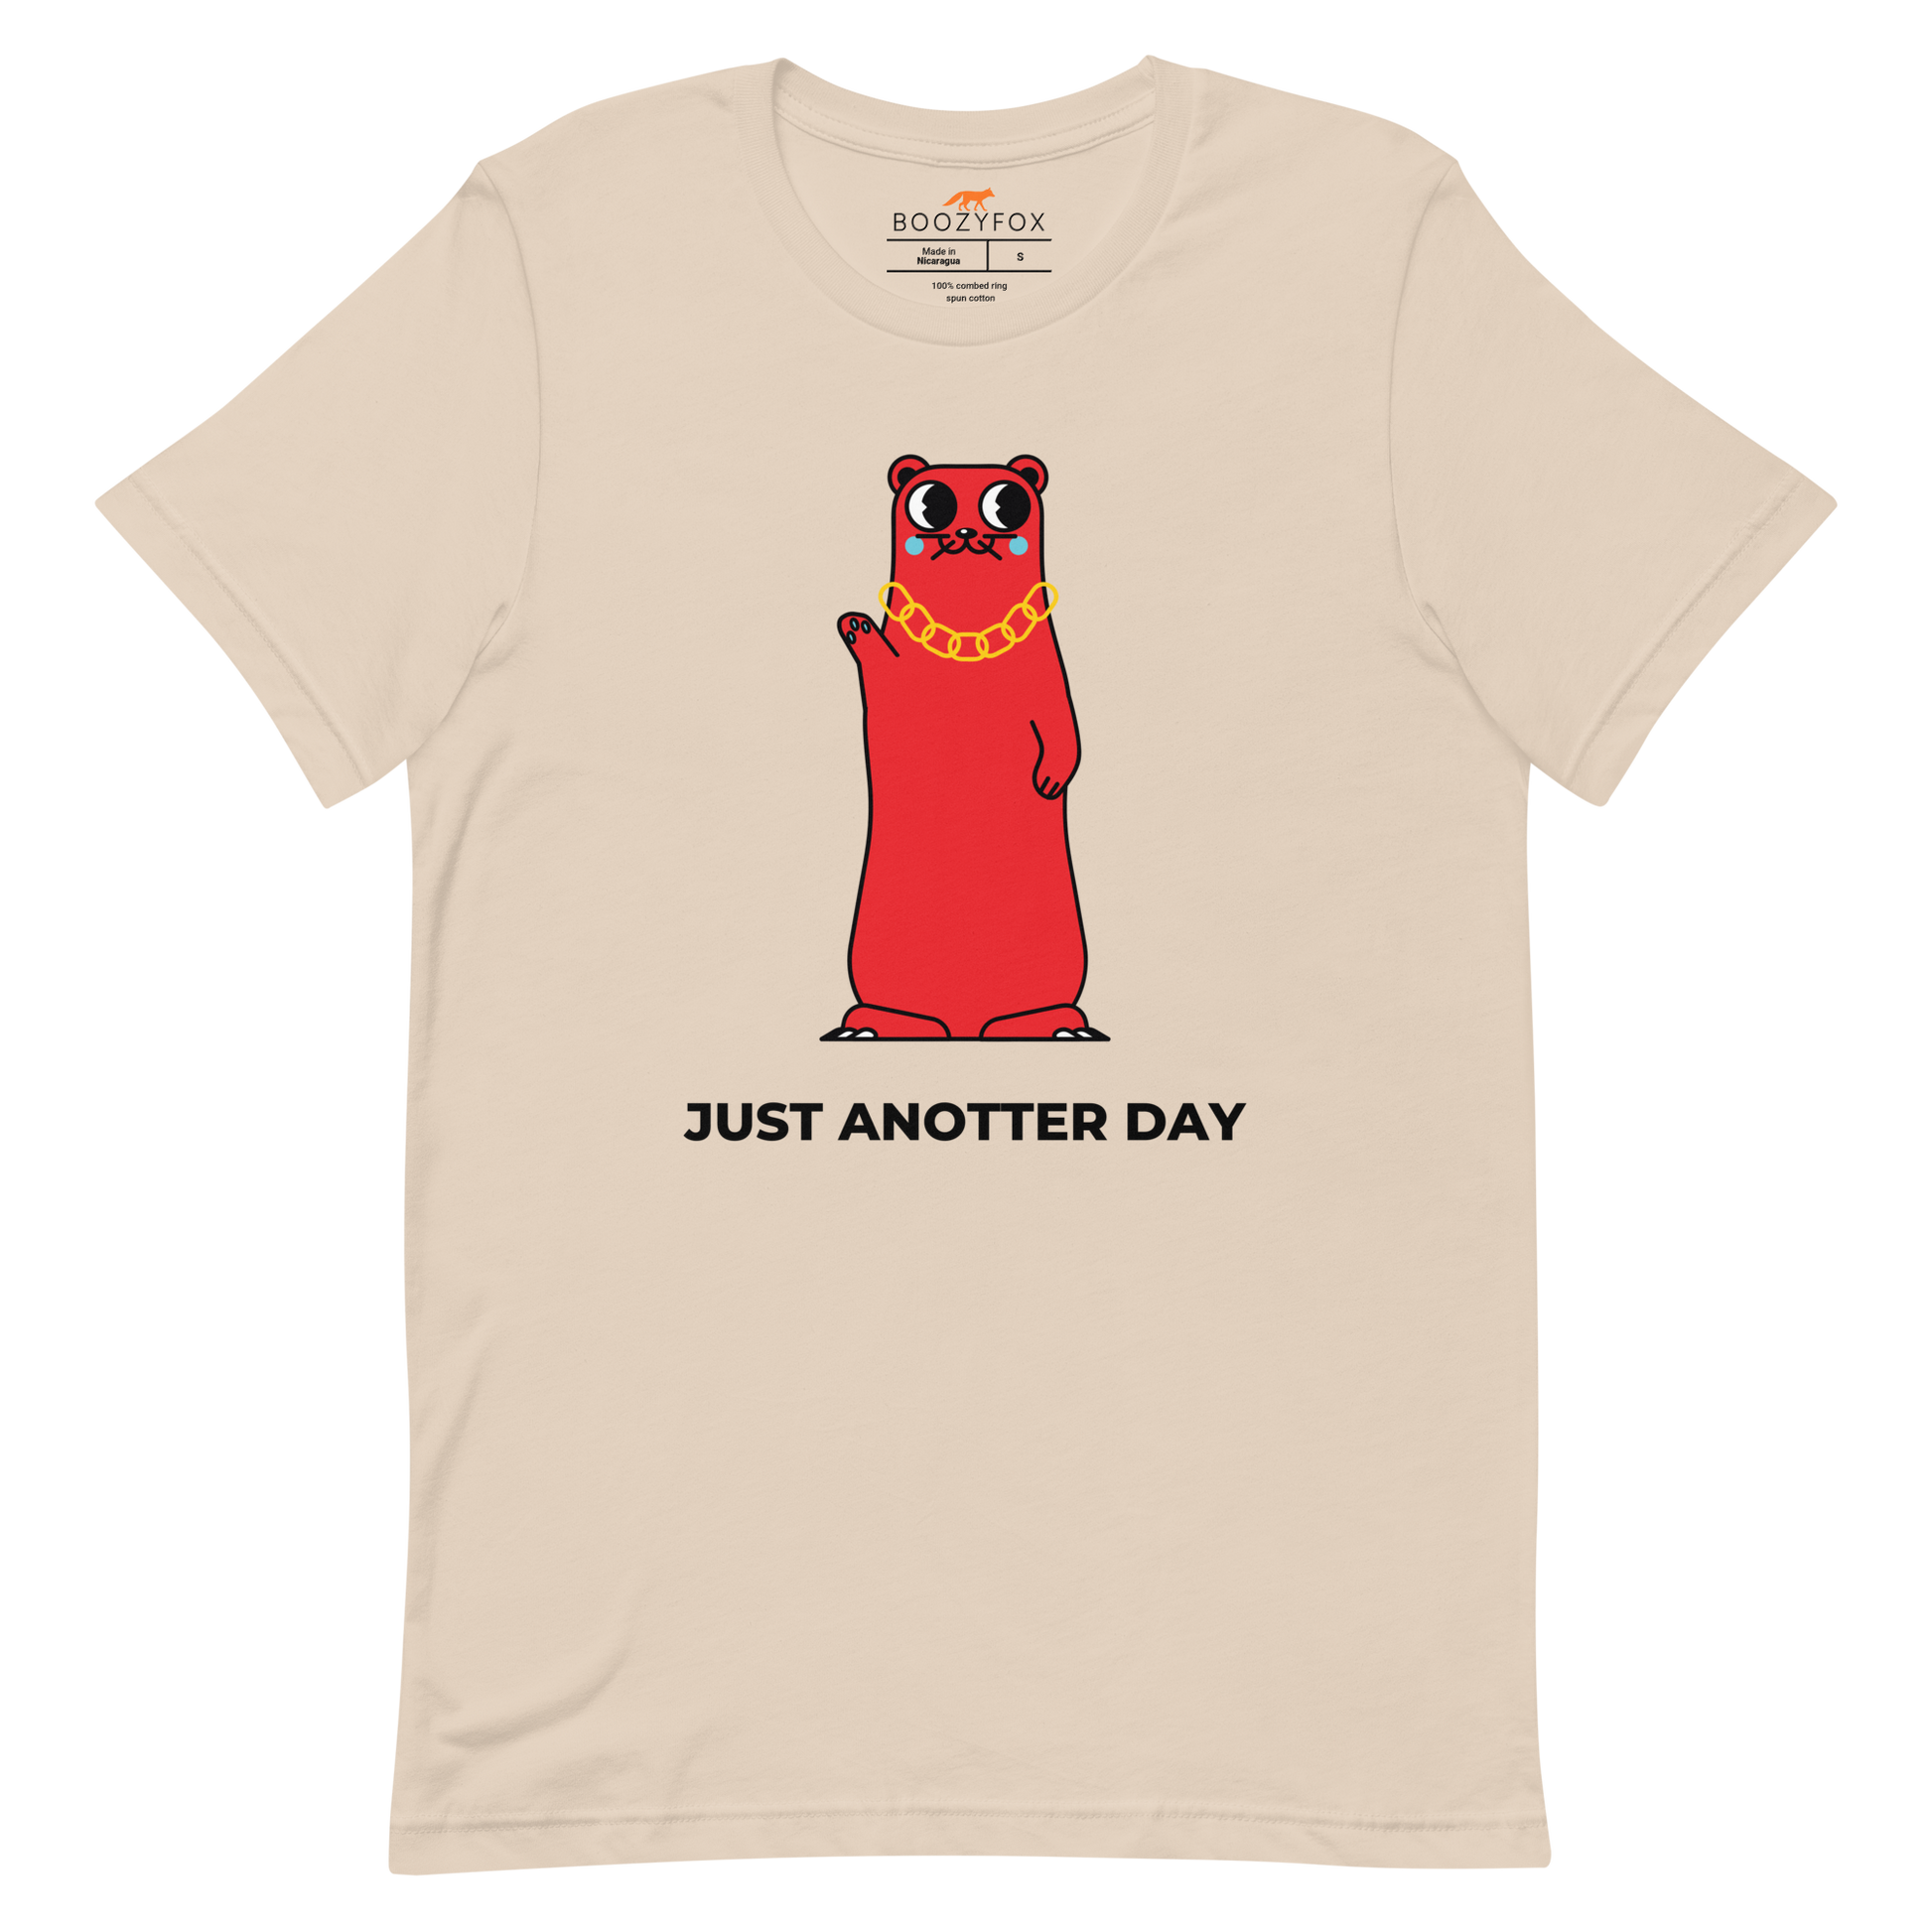 Soft Cream Premium Otter T-Shirt featuring a Just Anotter Day graphic on the chest - Funny Graphic Otter Tees - Boozy Fox